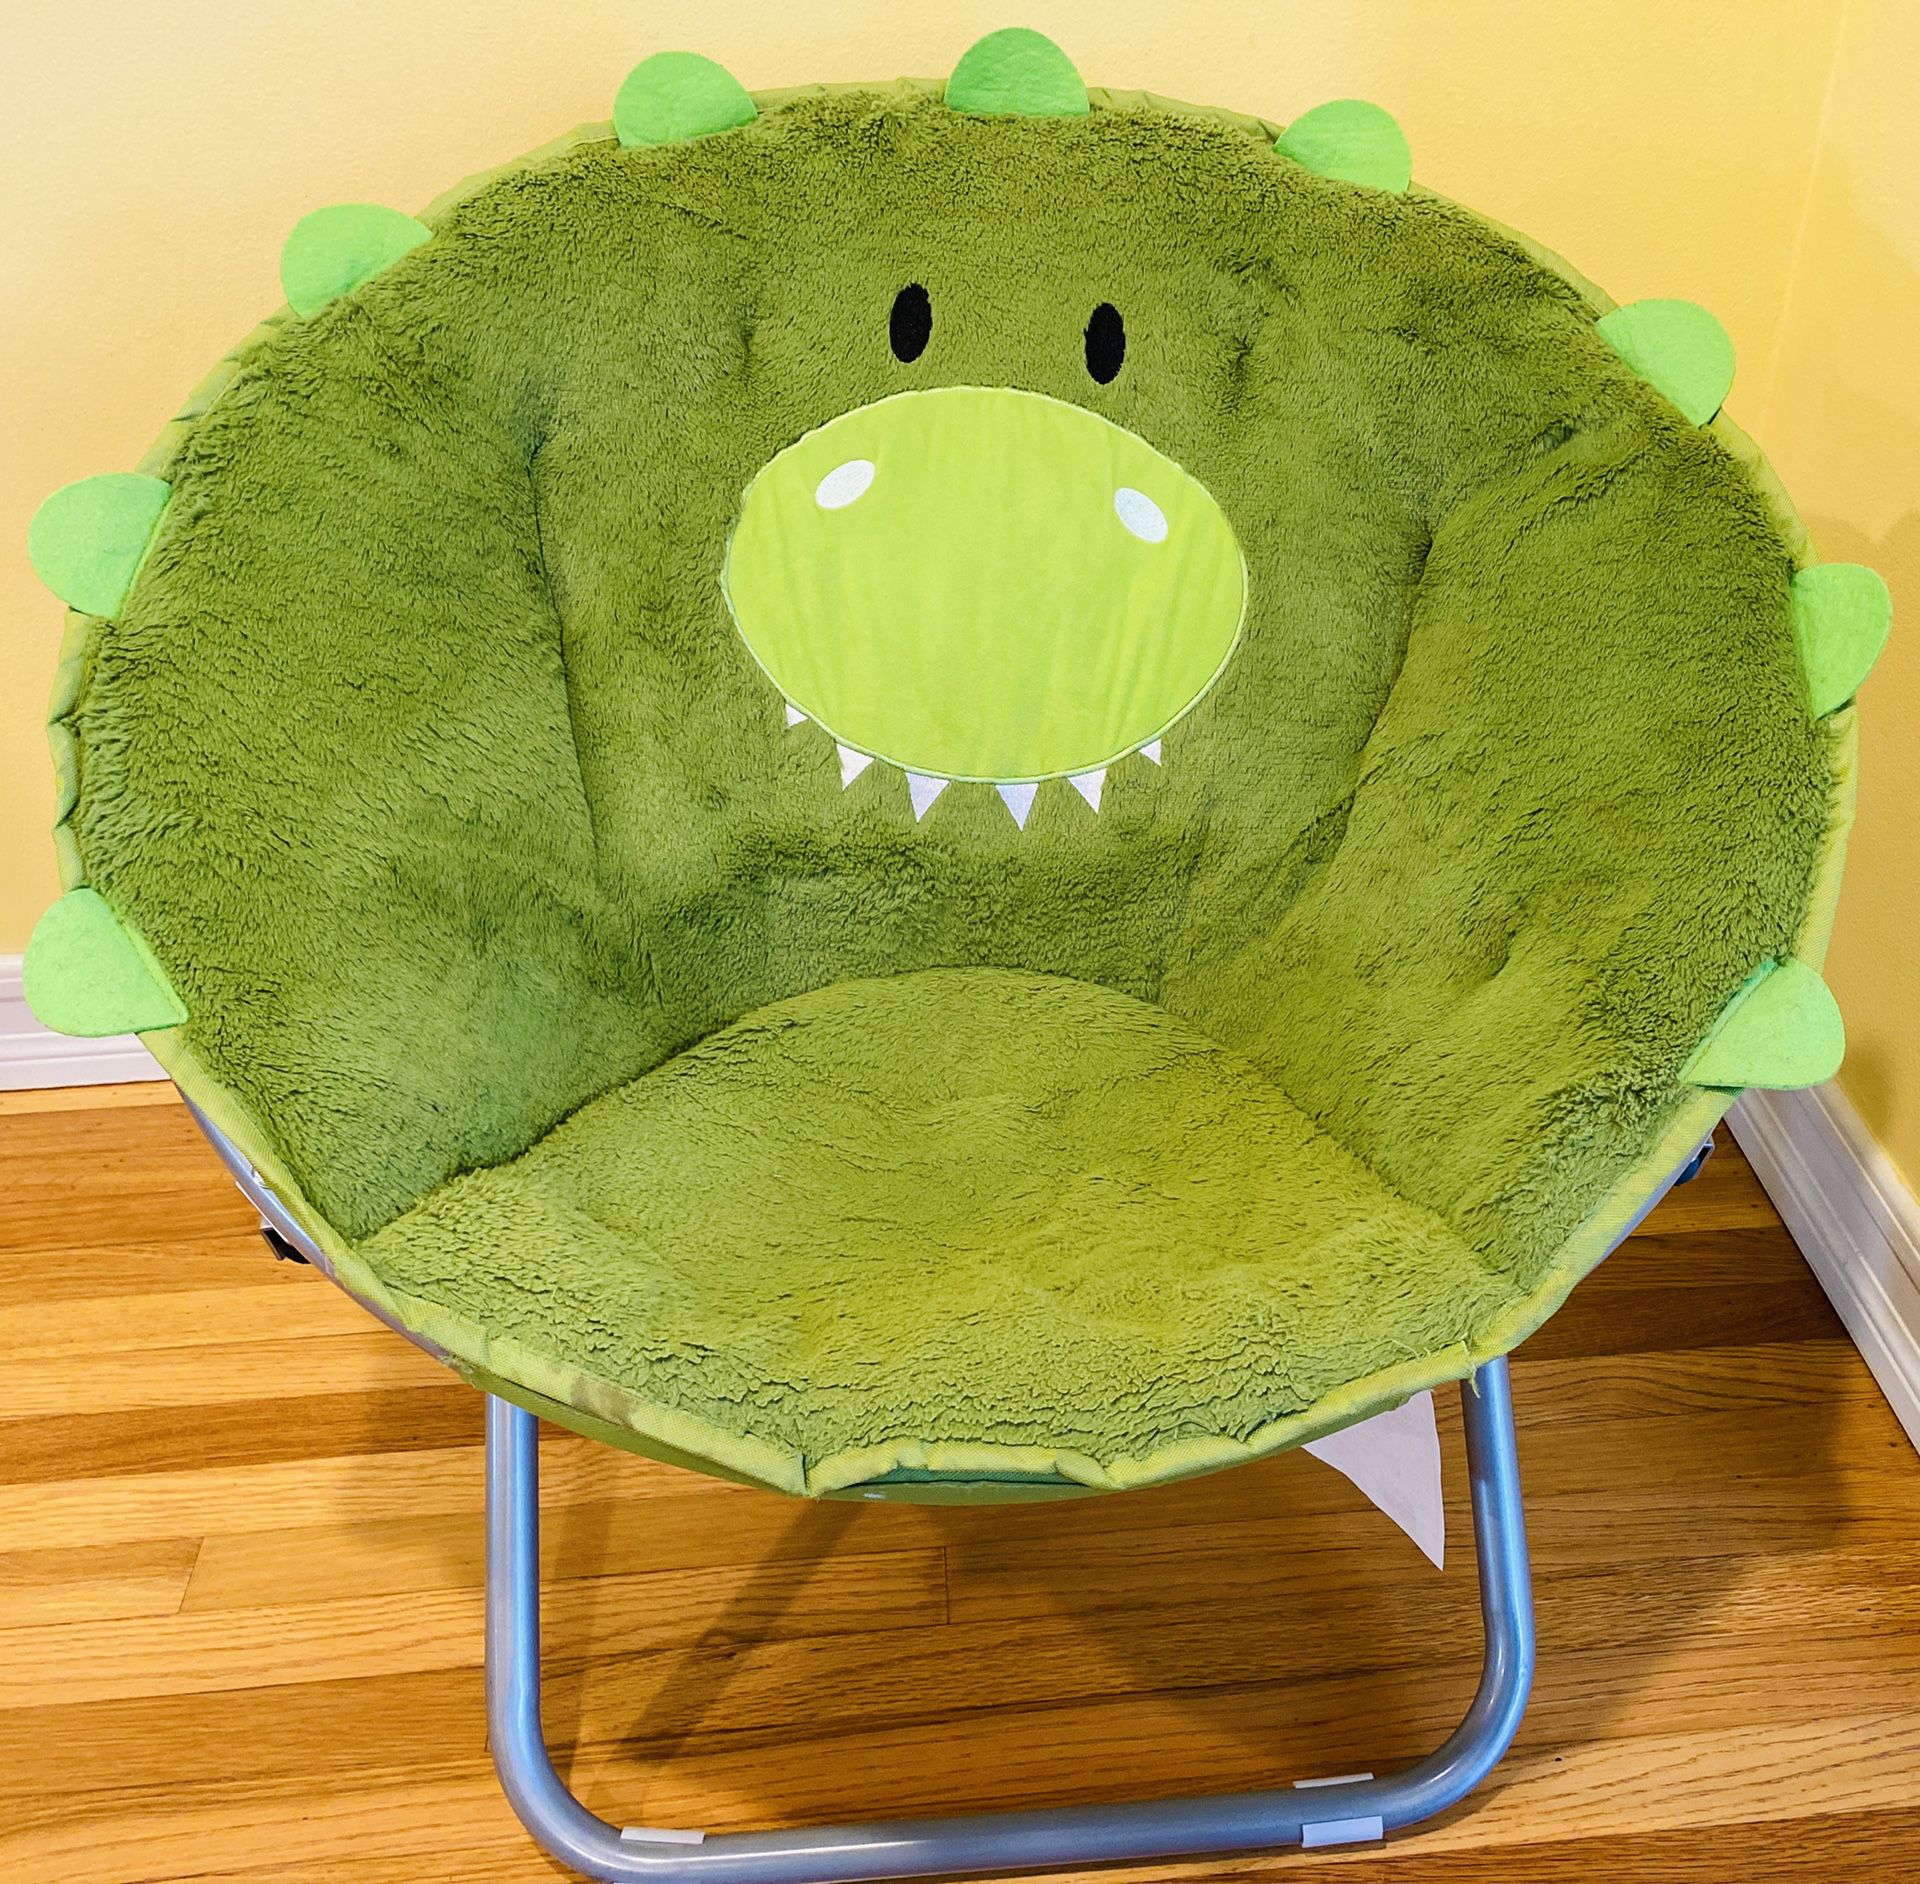 Portable Kids Folding Saucer Padded Moon Chair, Papasan Chair for Children/Toddler/Lounge/Furniture/Camping/Pet chair (used but in great condition)   